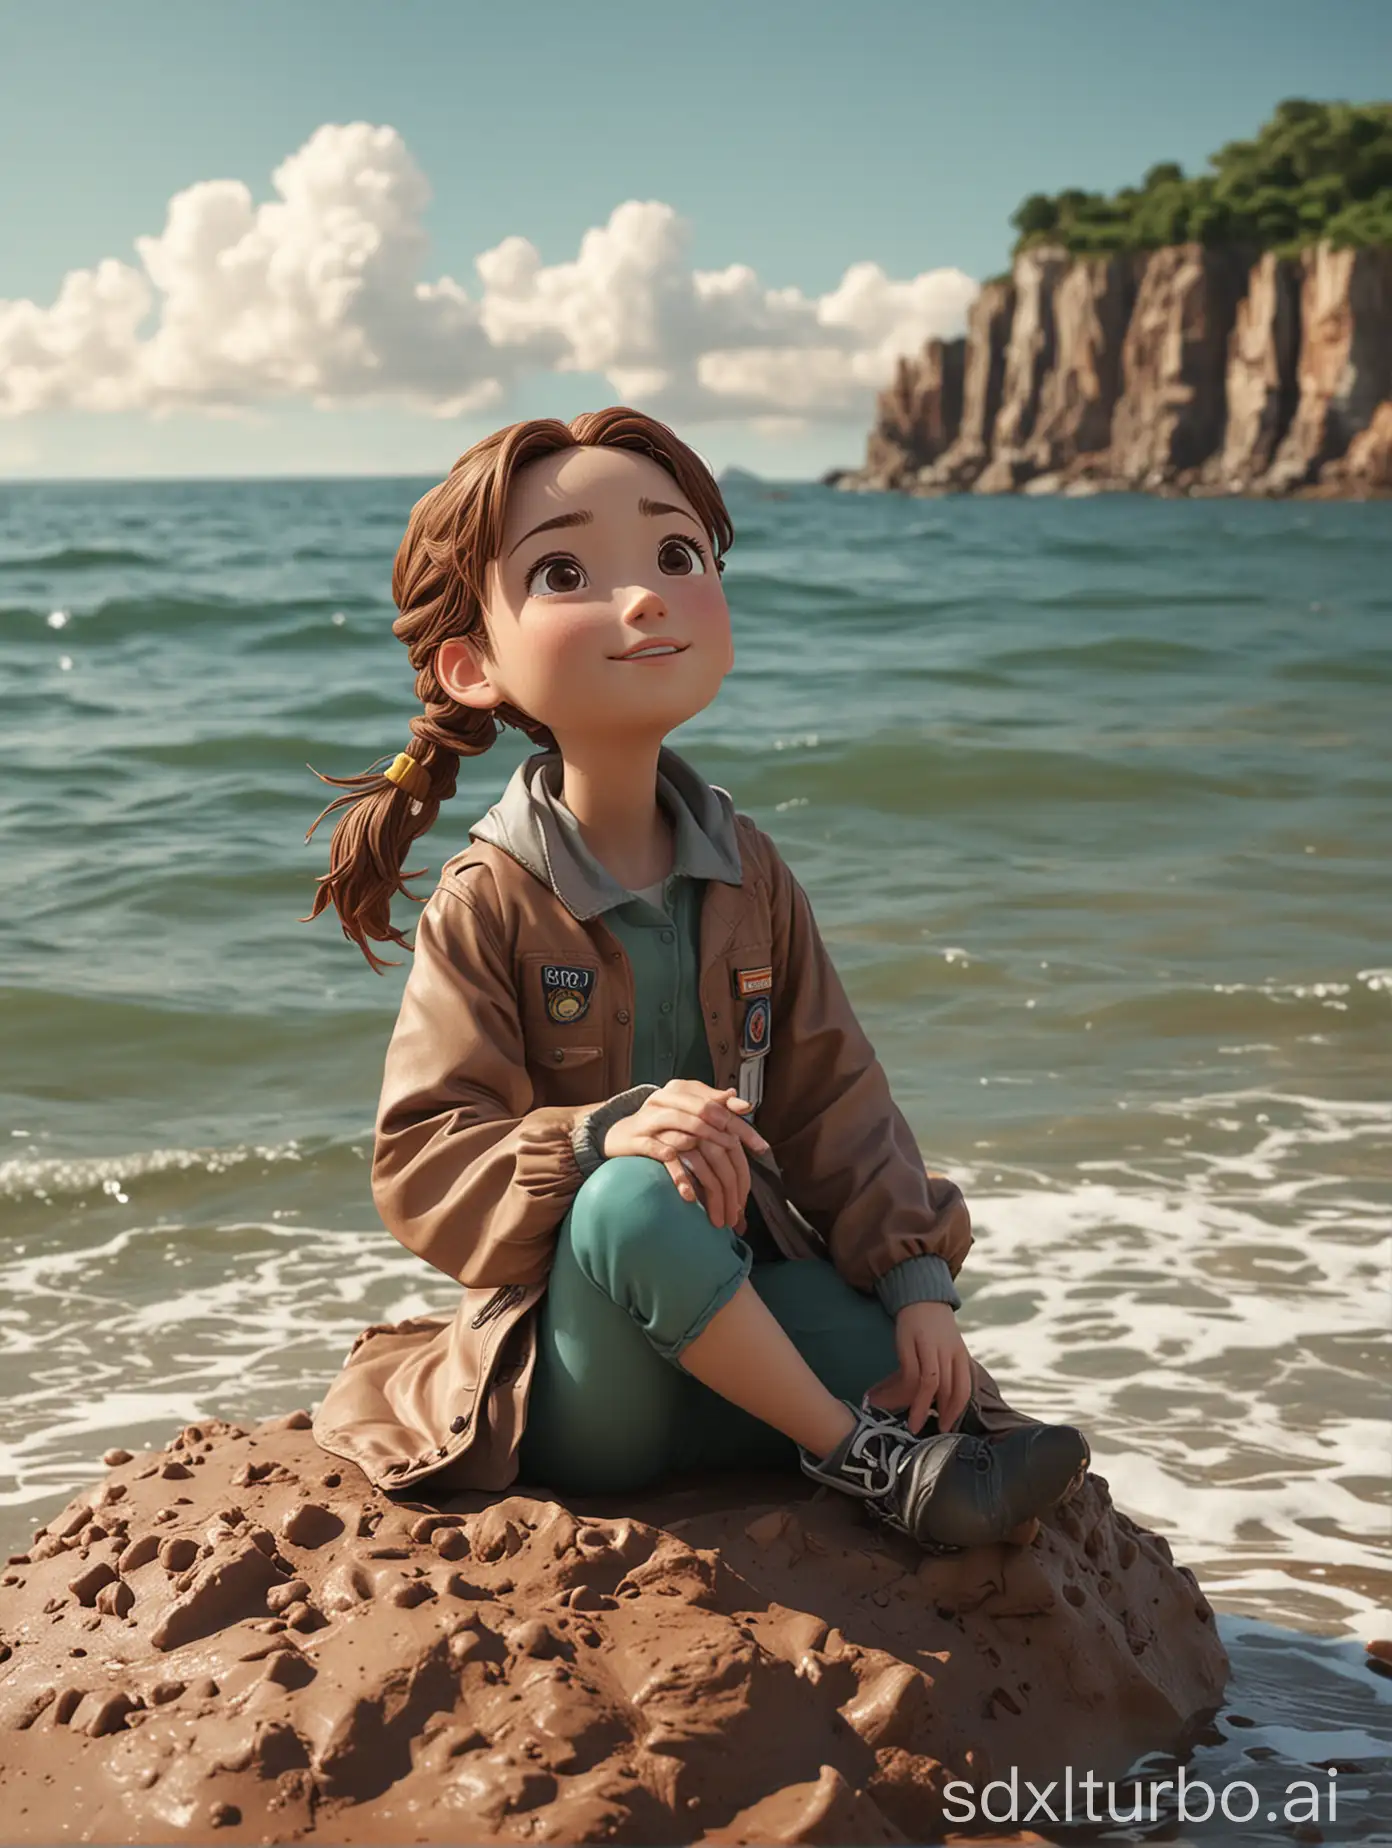 renyu tuling,1girl,solo,brown hair,looking up,sitting,ocean,day,arm up,sky,ponytail,water,jacket,outdoors,landscape,seaside,Clay style,using plasticine material,clay texture,dynamic Angle,dynamic pose,In the style of clay animation,stop-motion animation,3D cartoon characters,percussive visuals,surreal dreamlike style